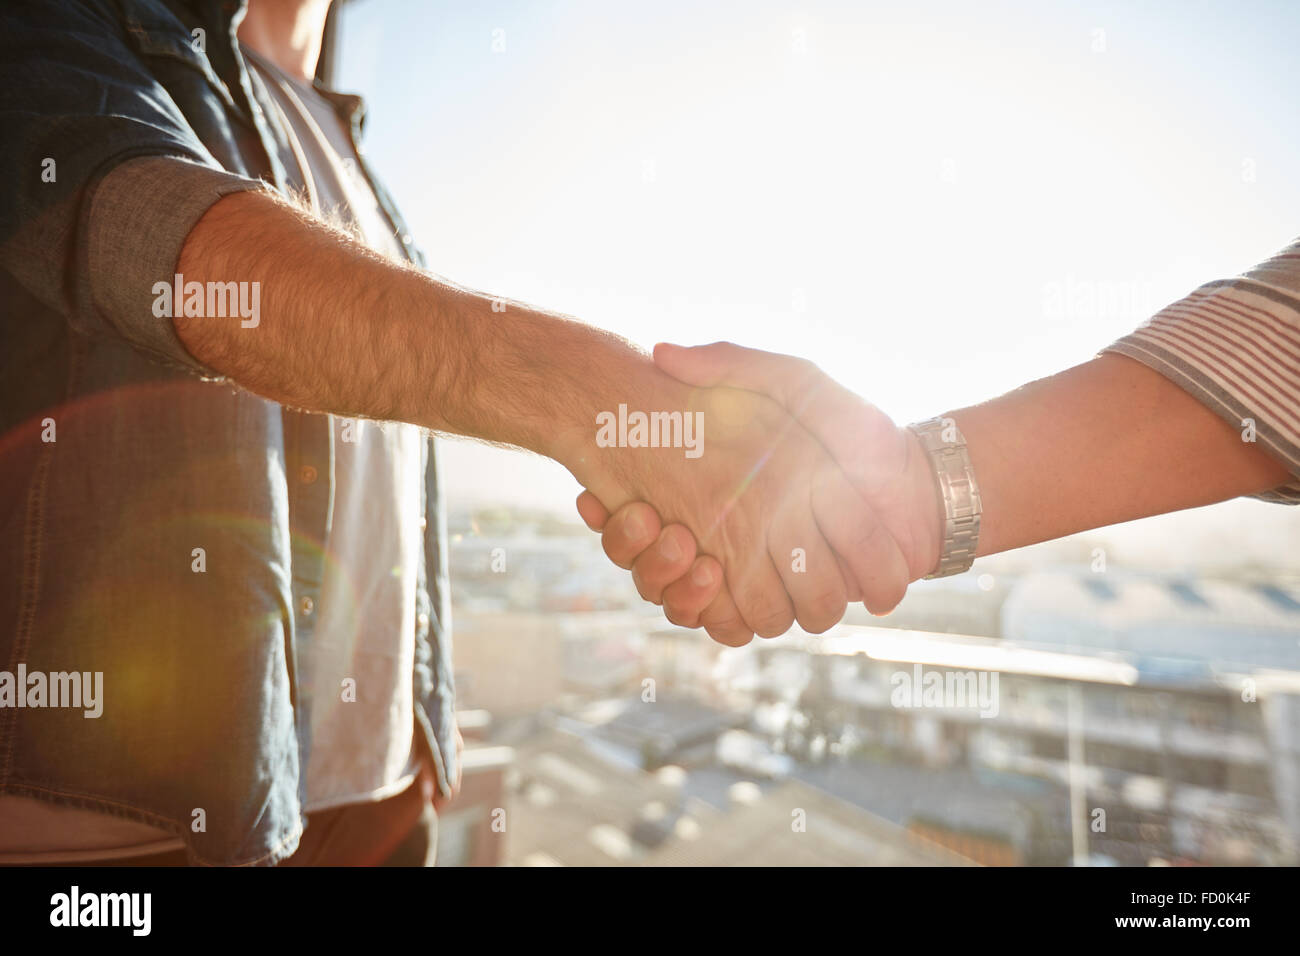 Closeup of two shaking male hands with sun flare. Focus on handshake against cityscape. Stock Photo